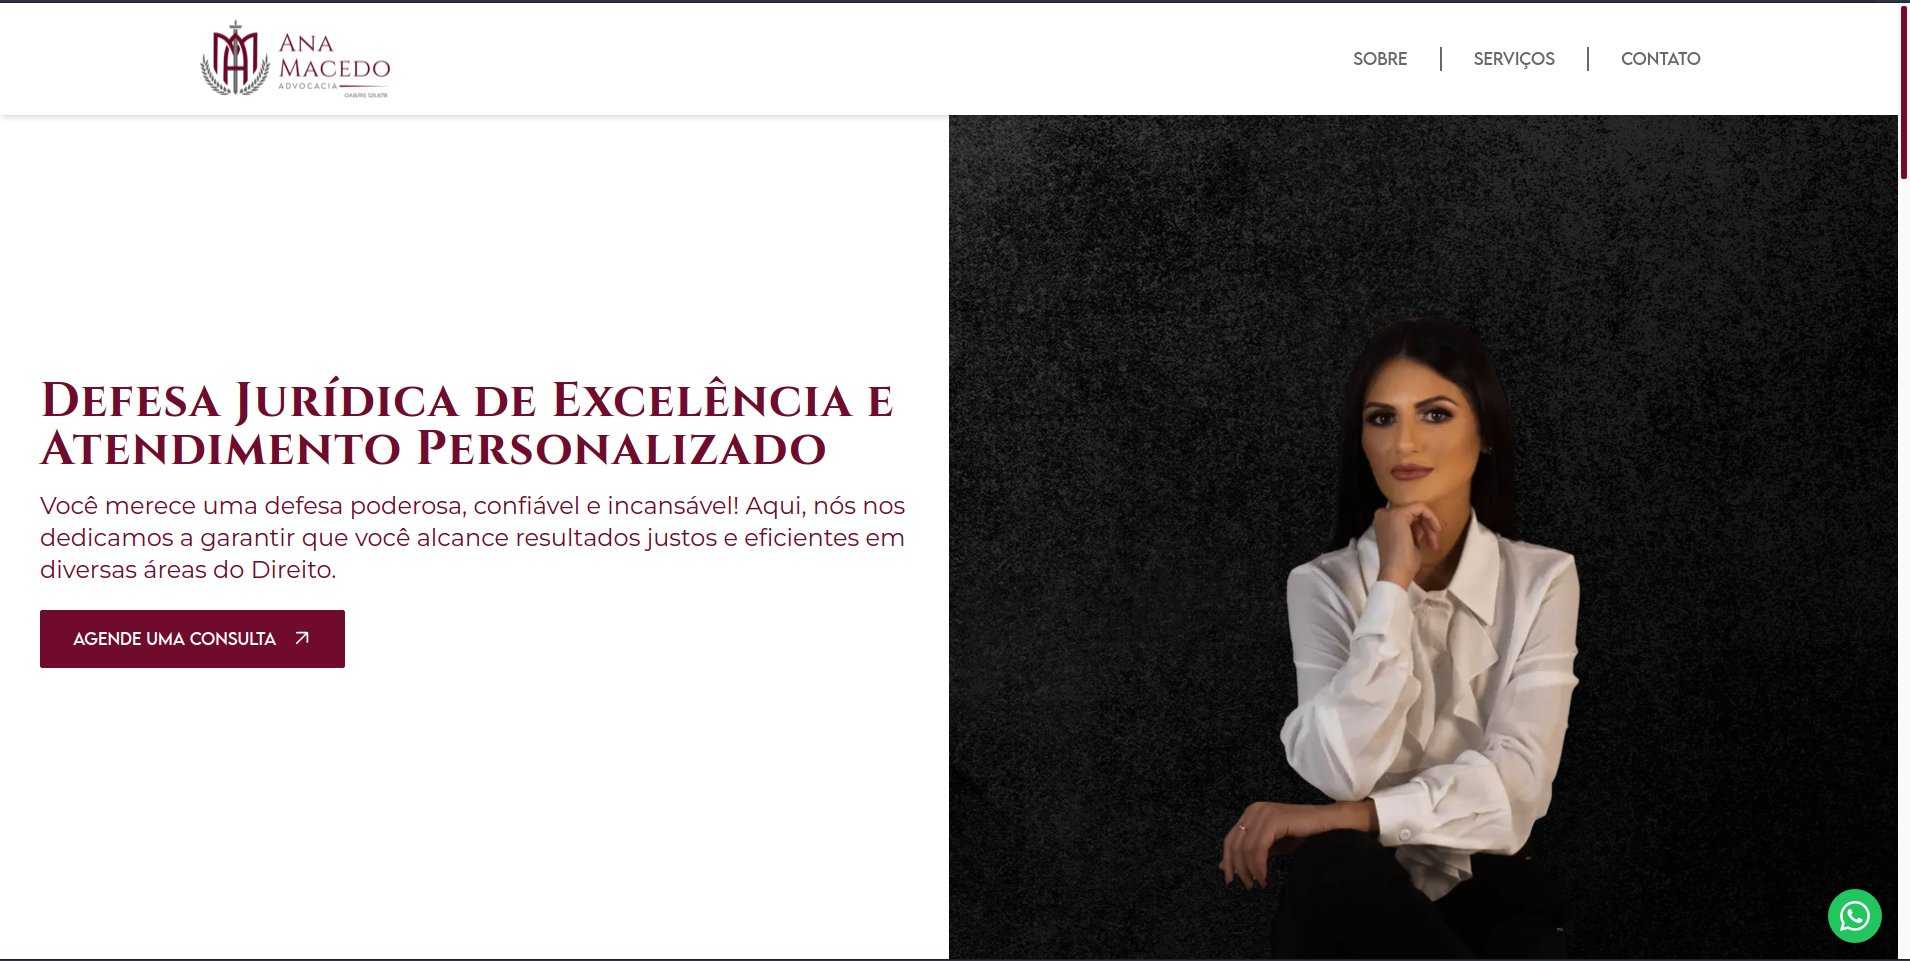 Ana Macedo Advocacia - A landing page for a law firm!